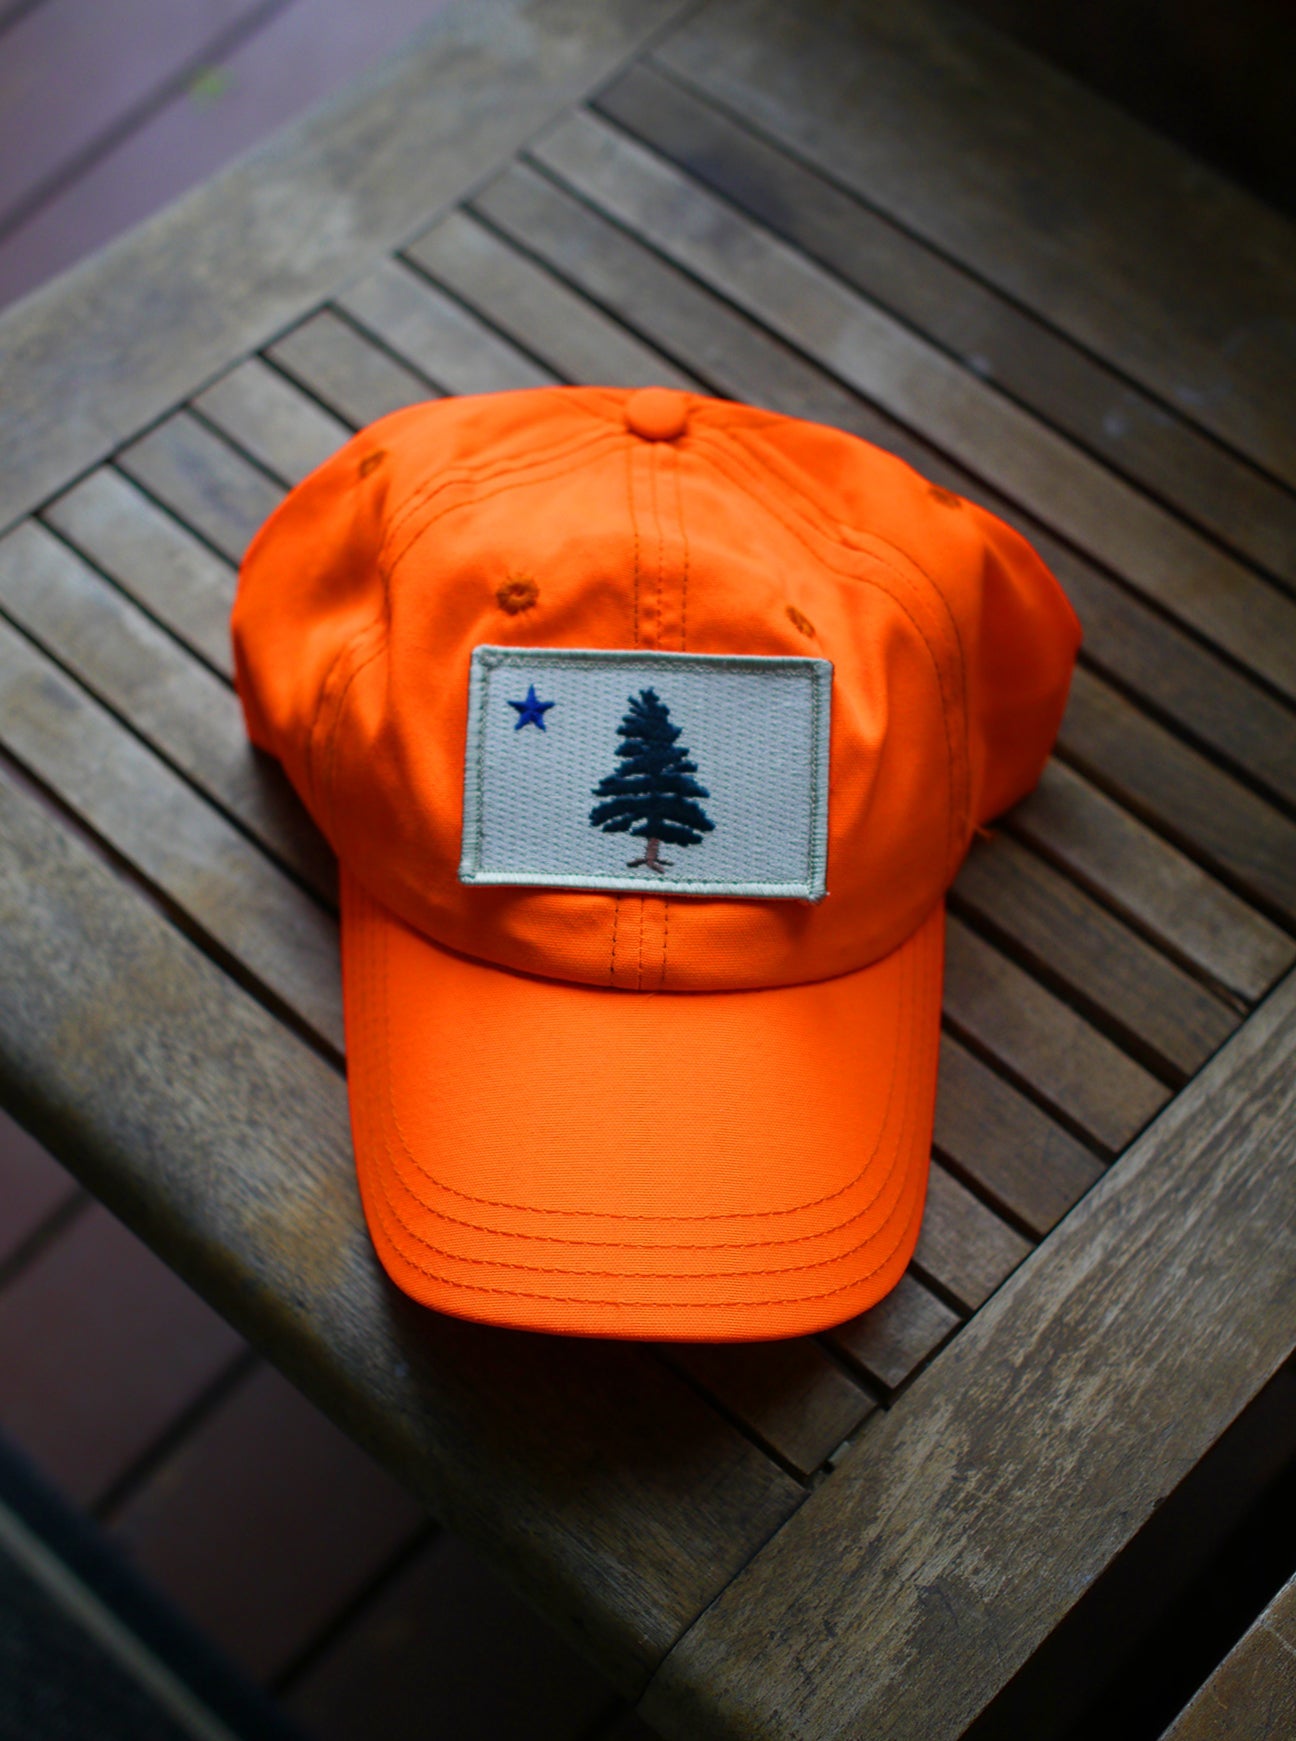 1901 Original Maine Flag insect-repelling baseball cap in hunter safe blaze orange sitting on a wooden bench in the sun. 